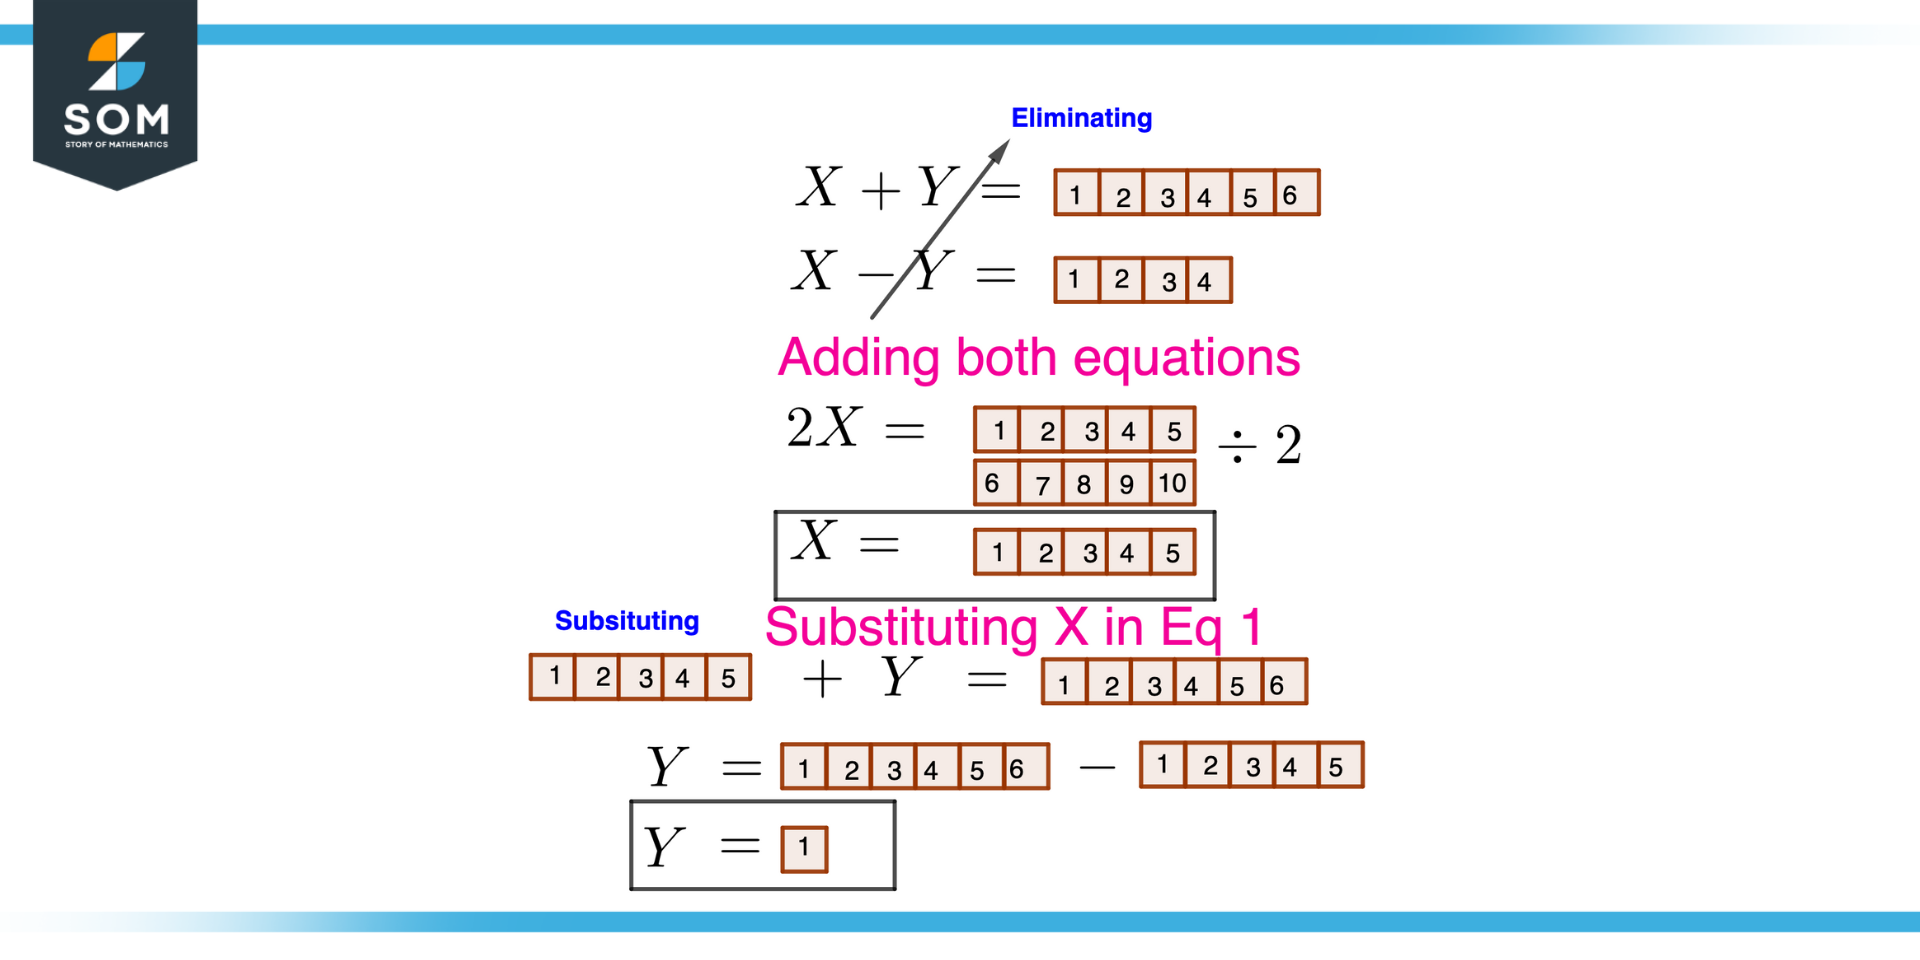 Eliminating and Substituting to get solution of equation